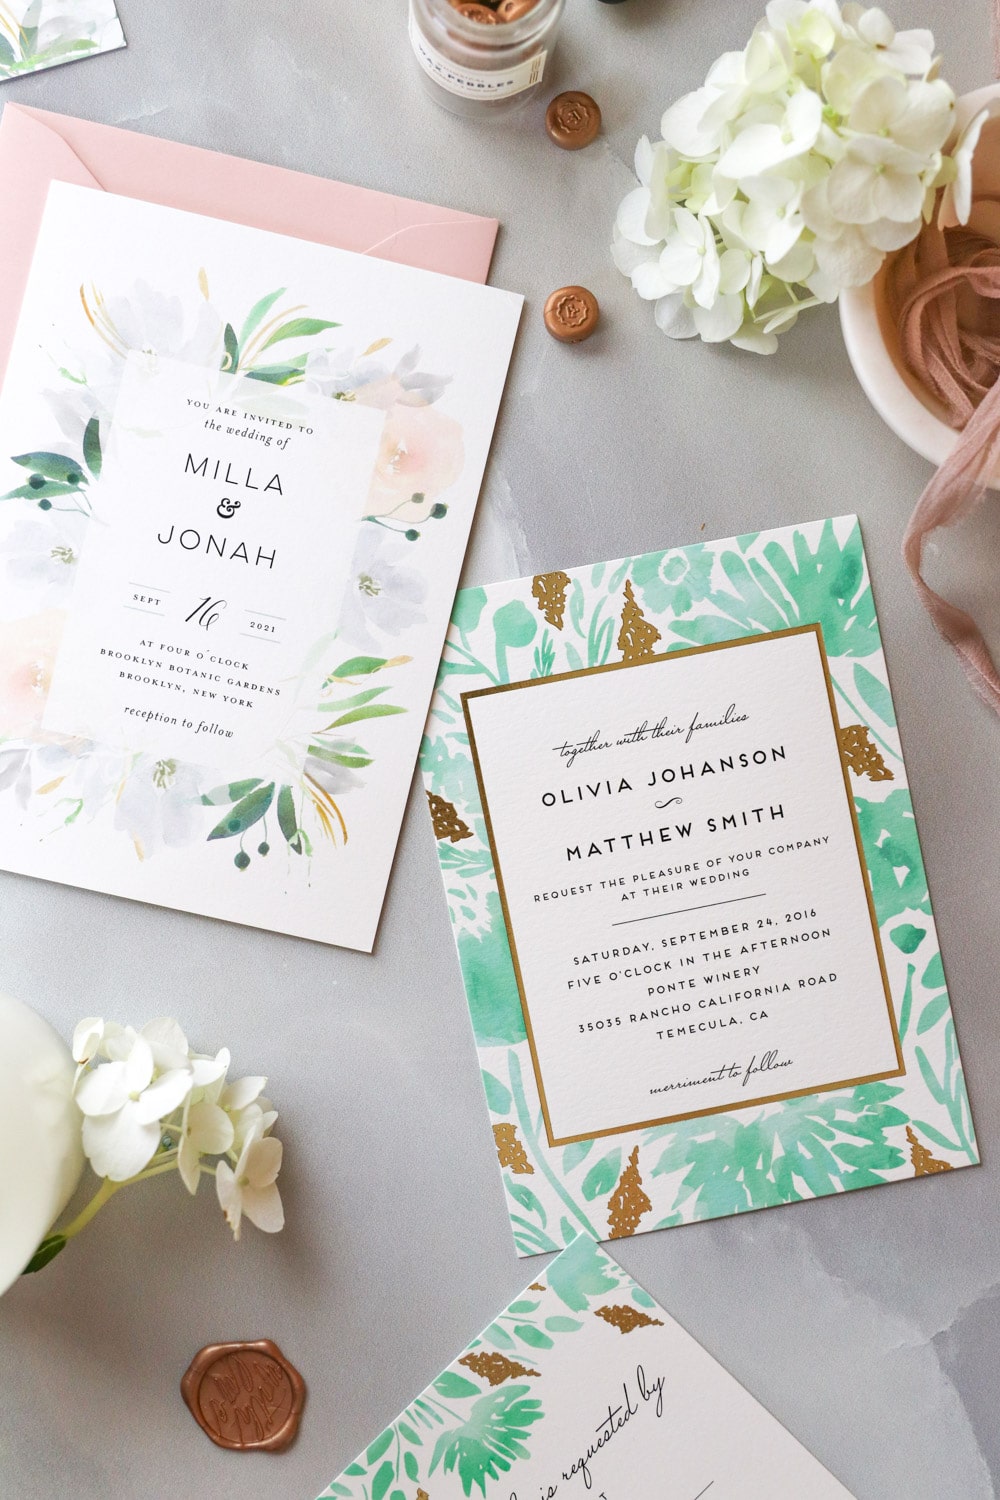 Top 3 Textured Card Stock Papers for Wedding Invitations